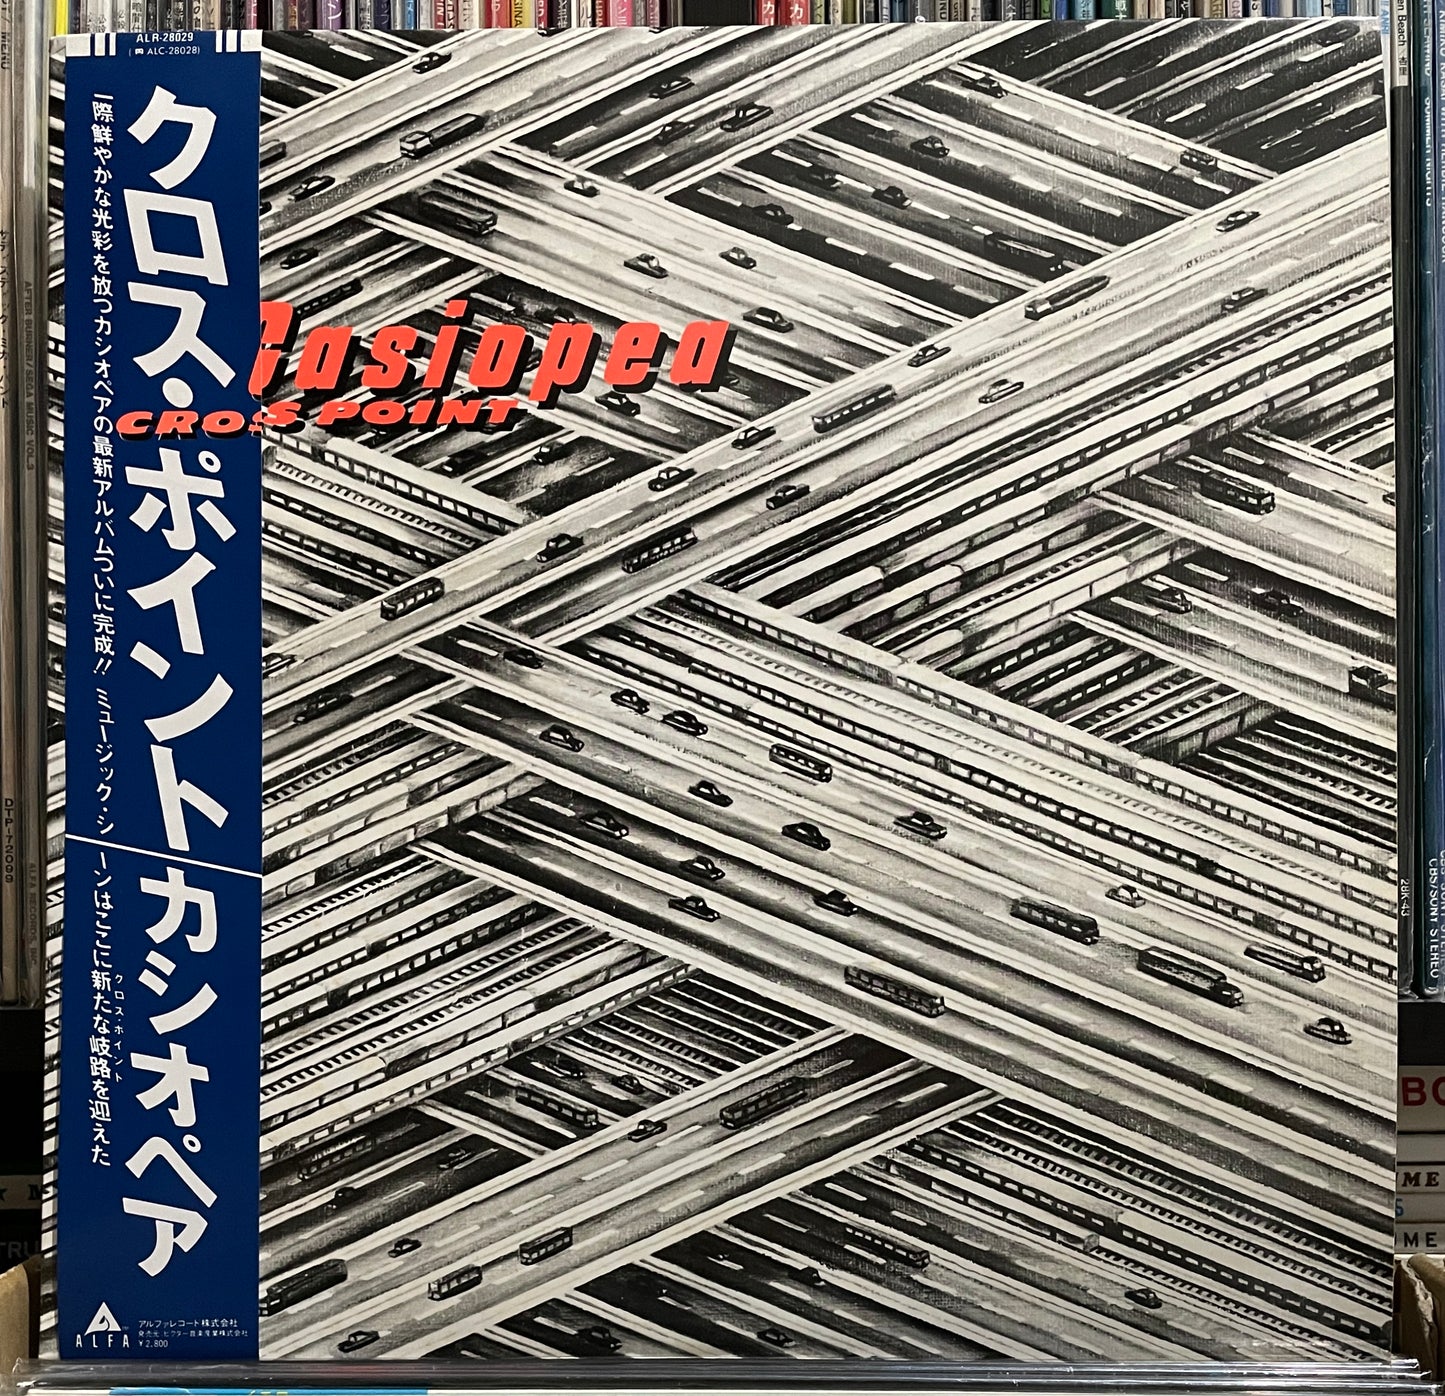 Casiopea “Cross Point” (1981)